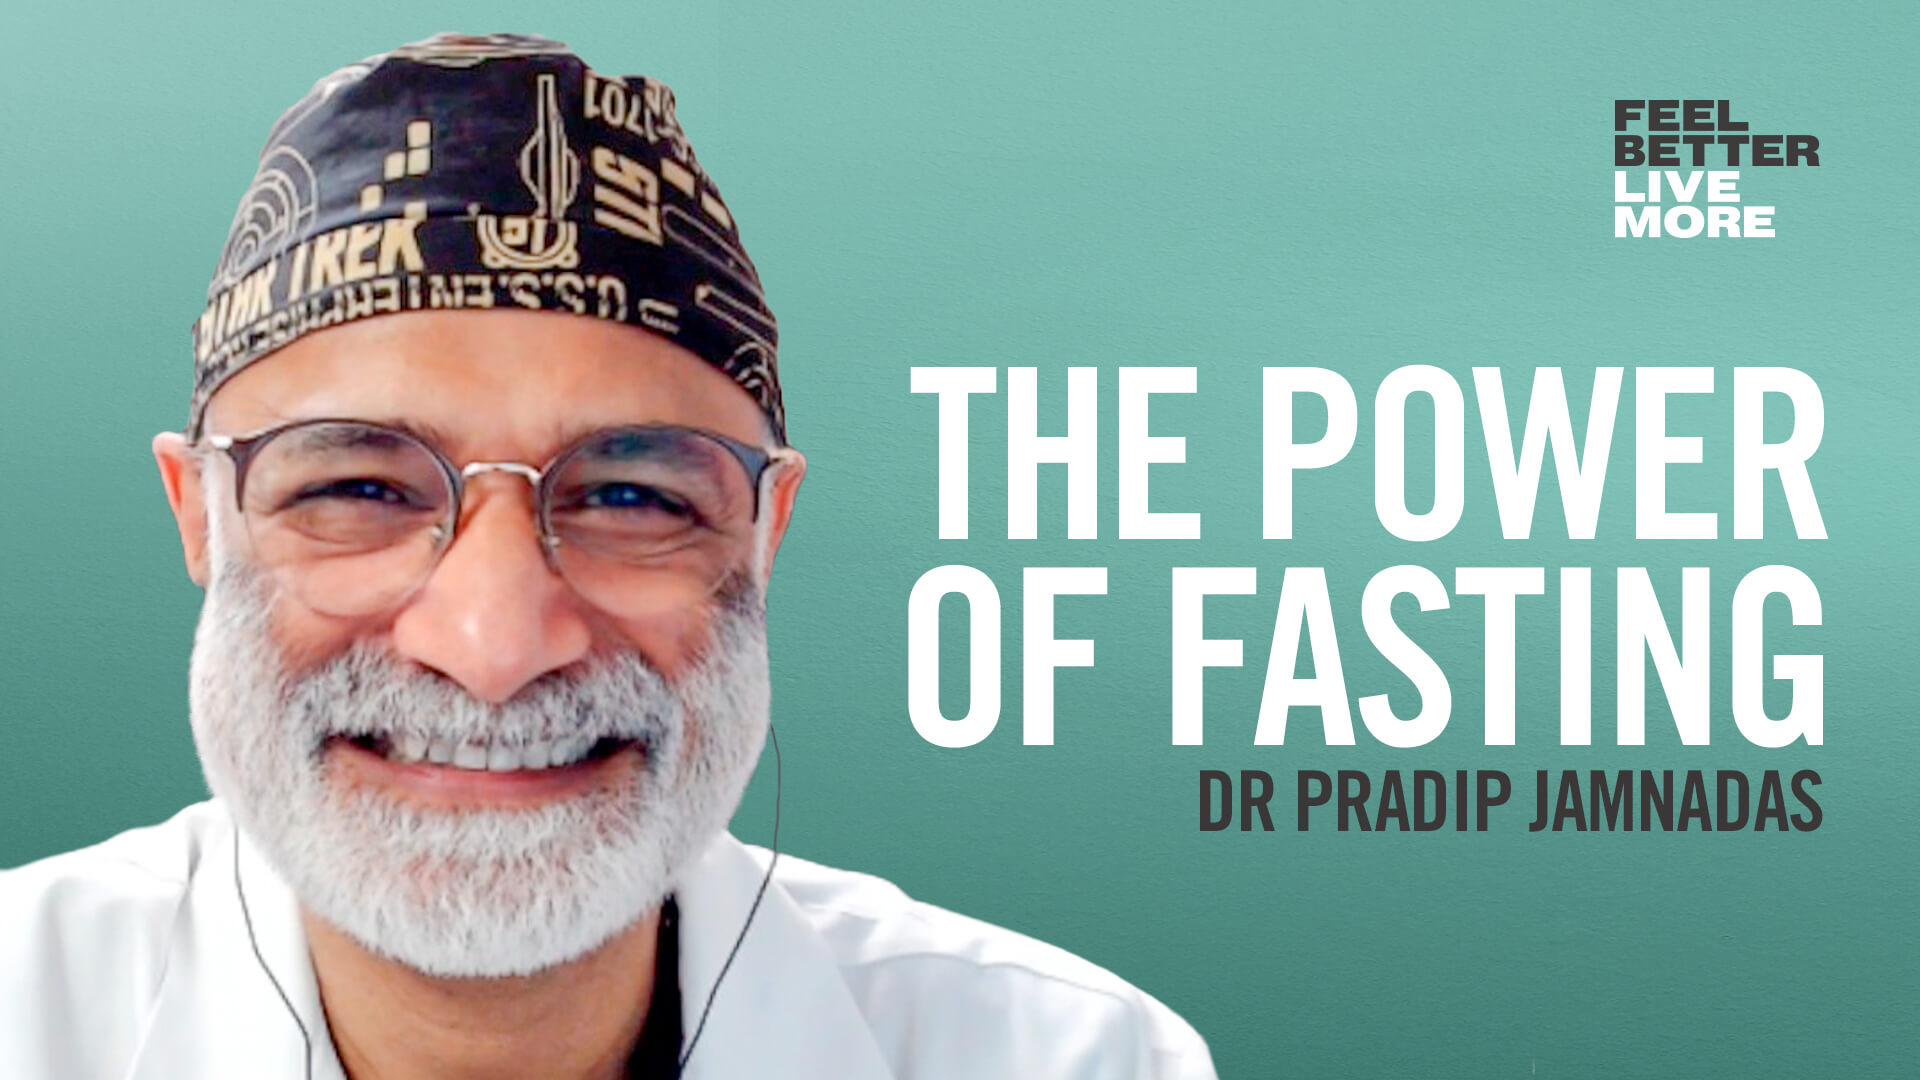 Why This Cardiologist Recommends Fasting with Dr Pradip Jamnadas - Dr  Rangan Chatterjee